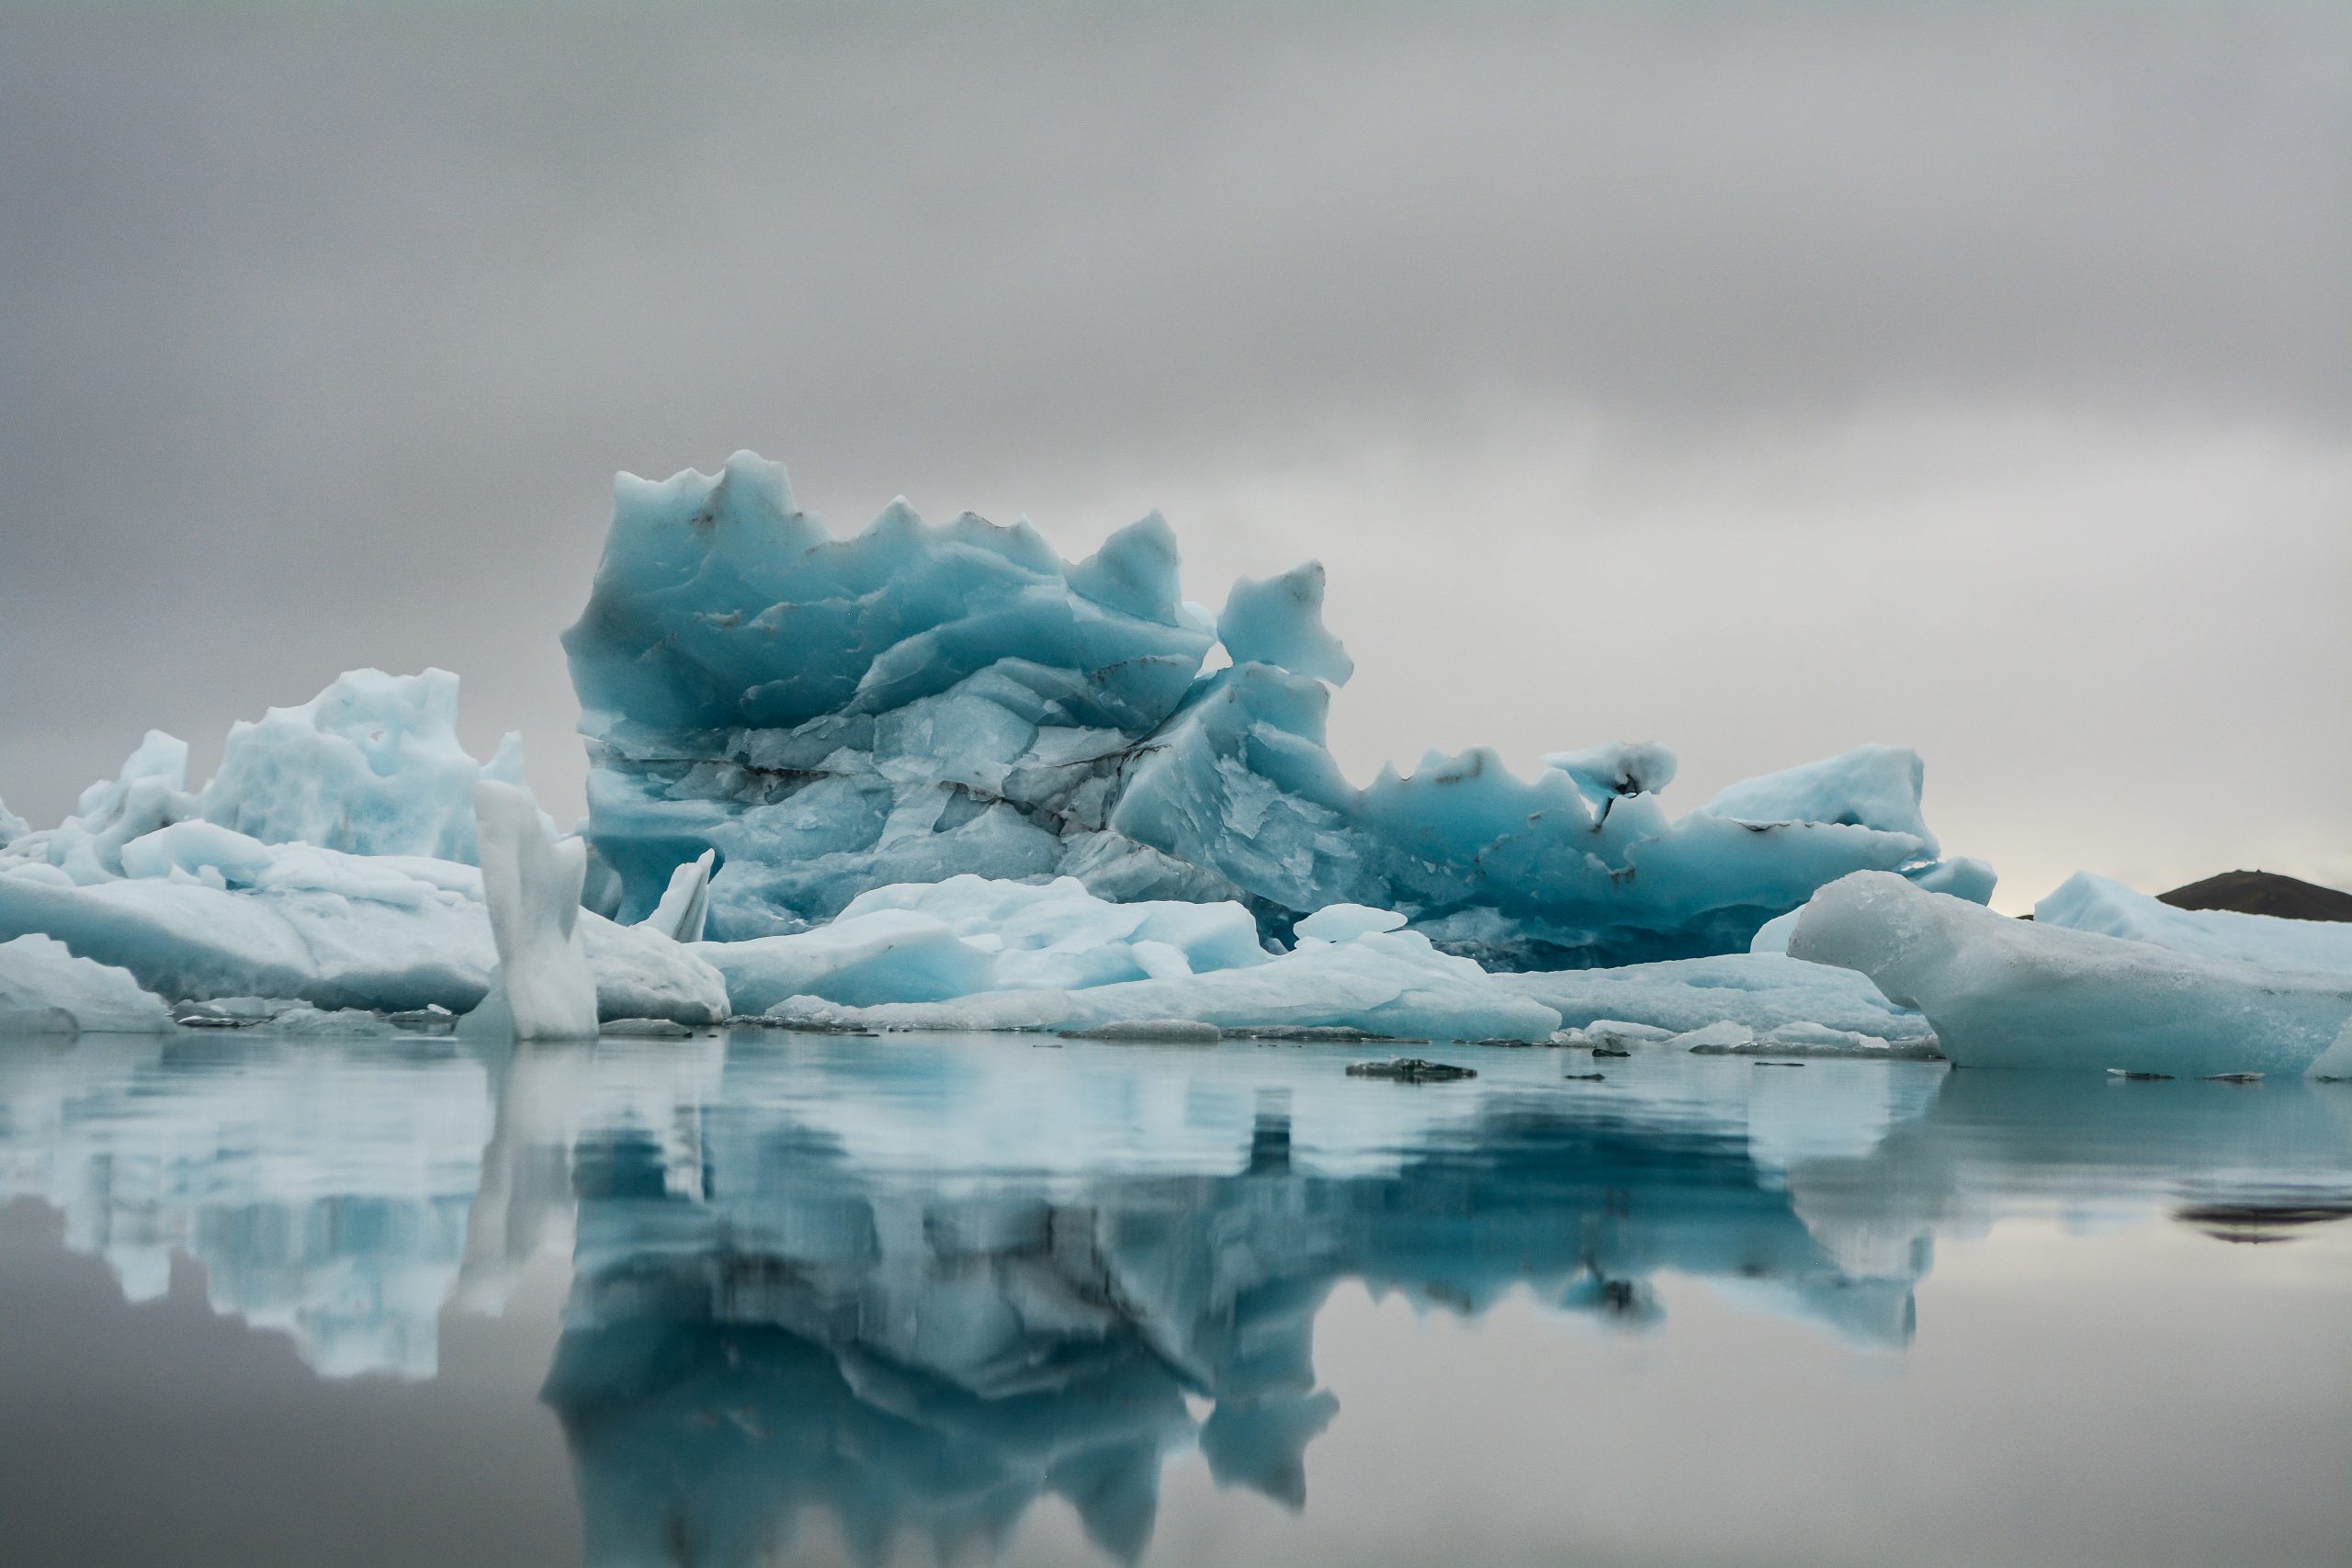 Global warming is a serious problem and glaciers are melting – listen to songs about it